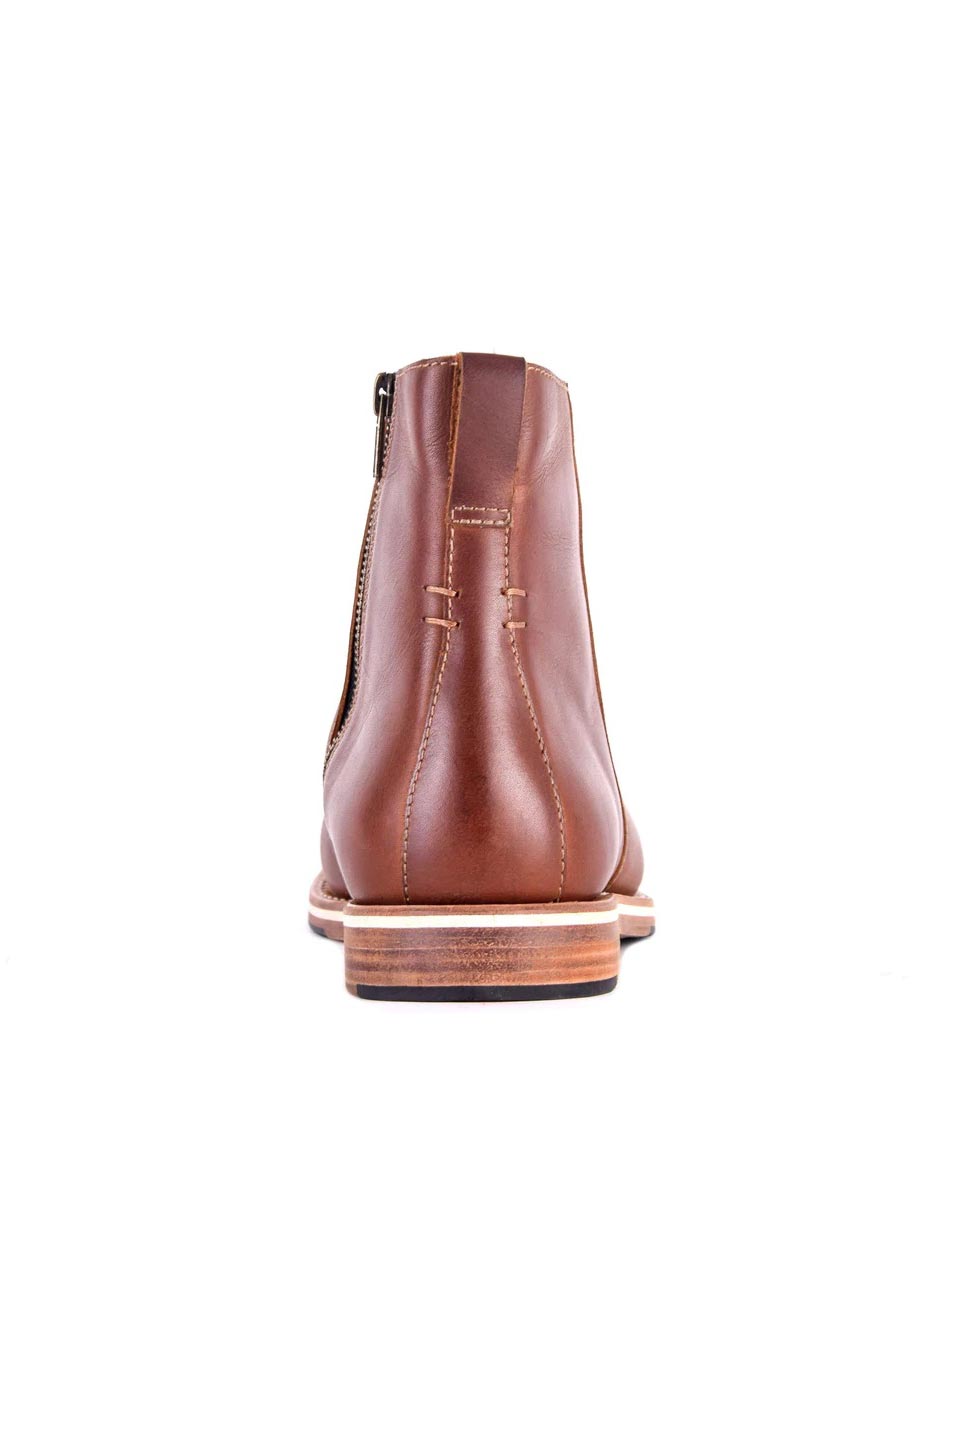 Helm Boots - The Pablo - Brown - Back